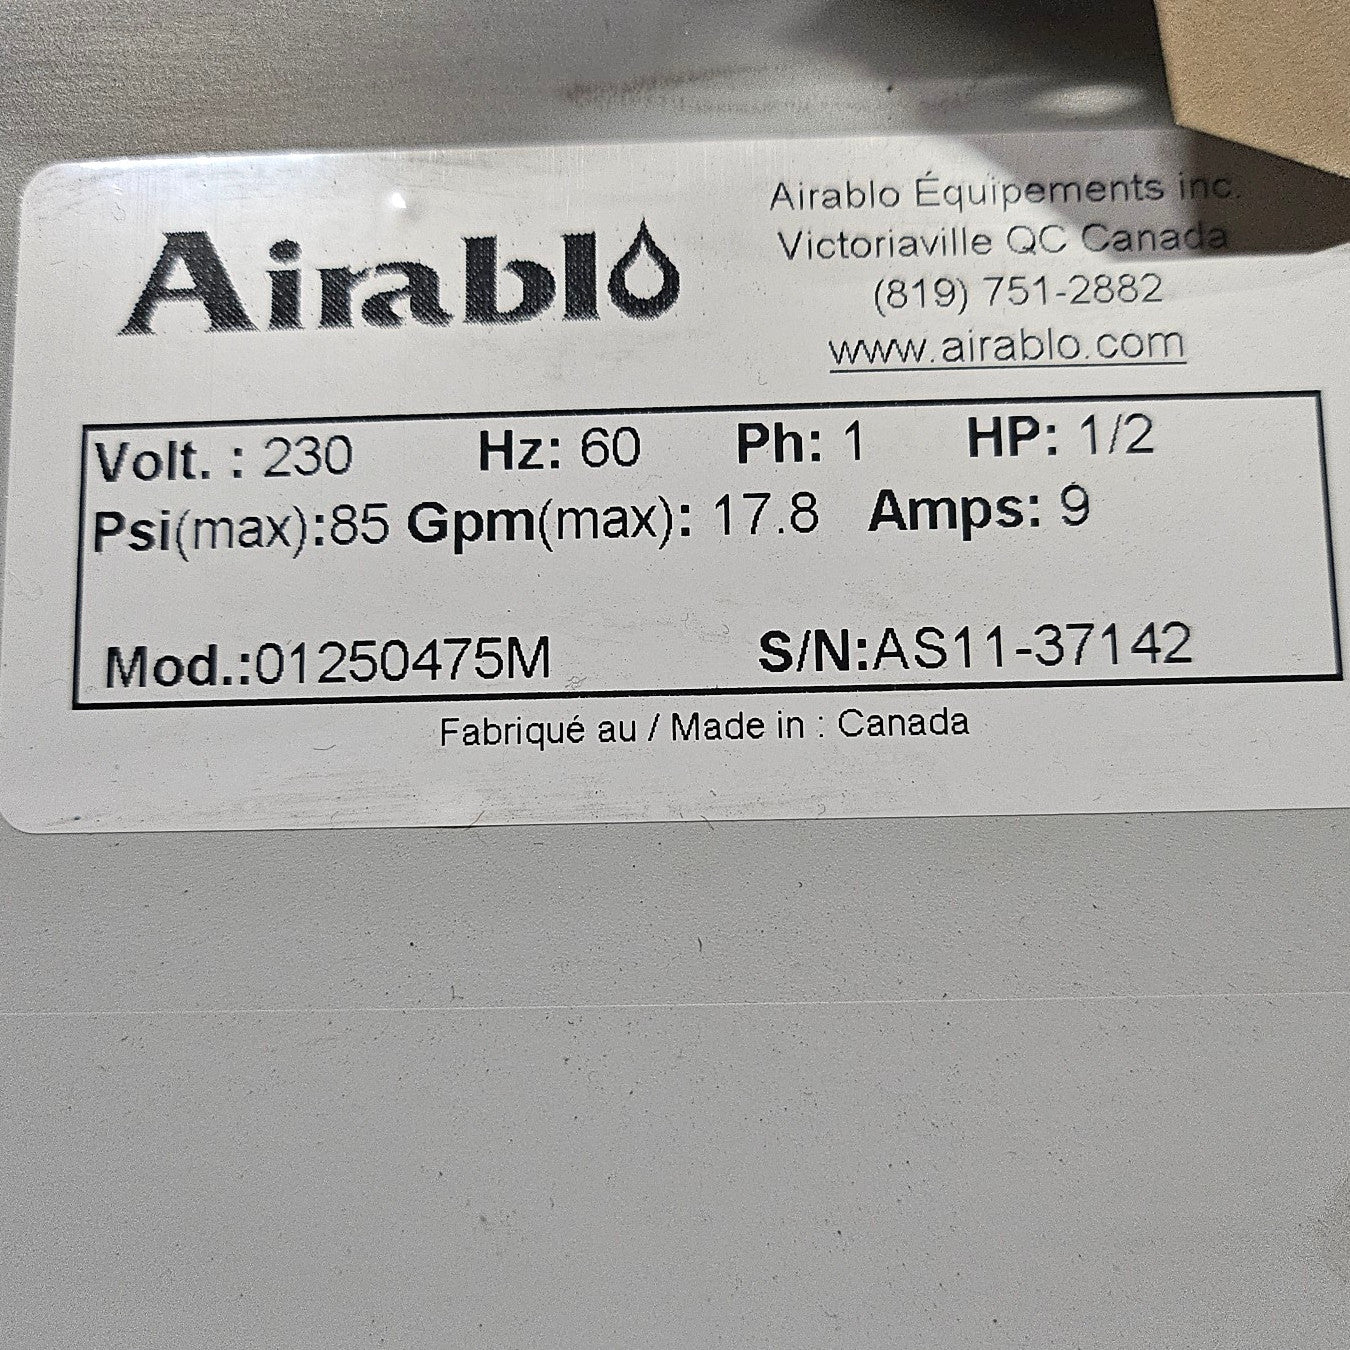 New Airablo 2-0.5hp Electric Releaser